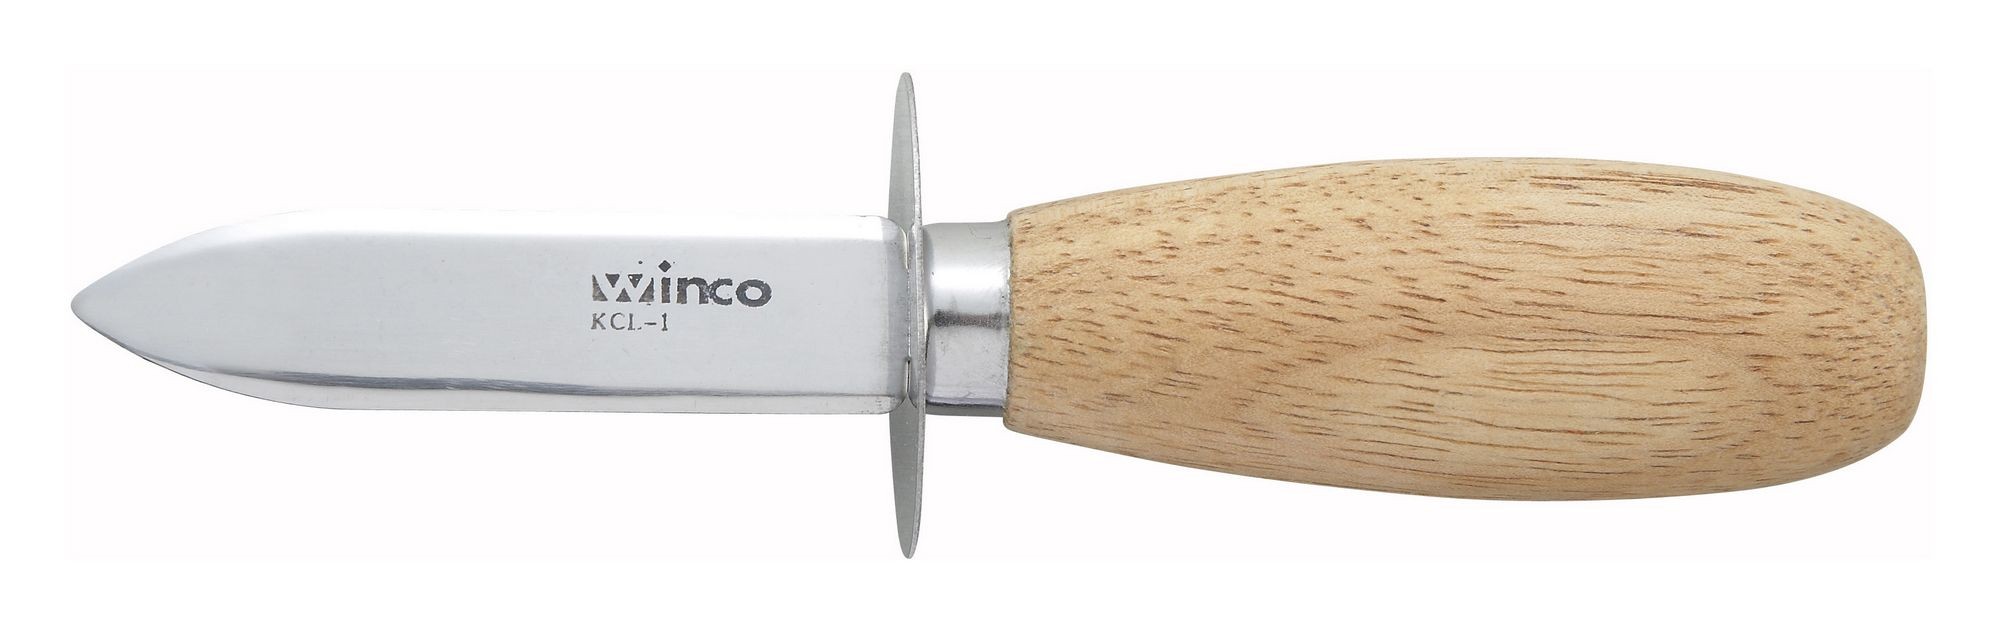 Winco KCL-1 Oyster/Clam Knife with Wooden Handle 2-3/4"